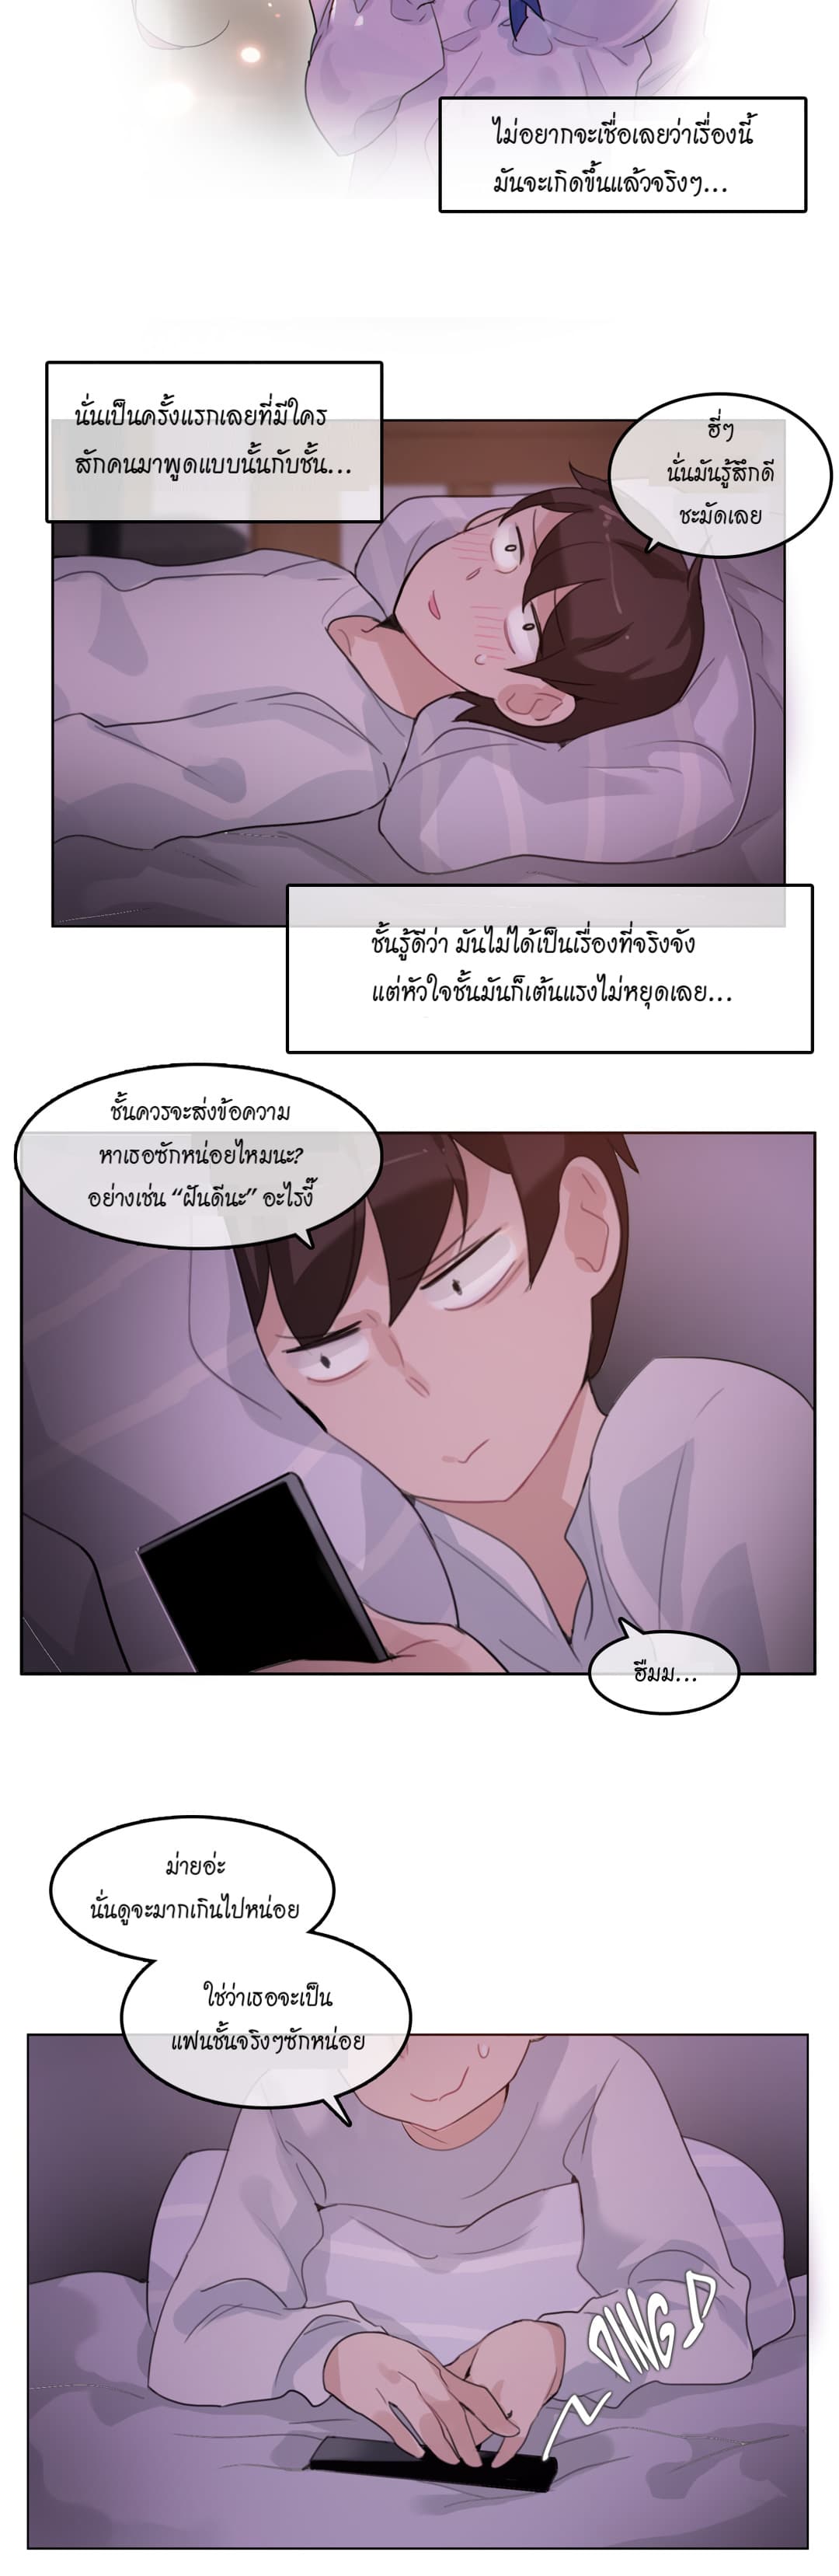 A Pervert’s Daily Life 28 (11)